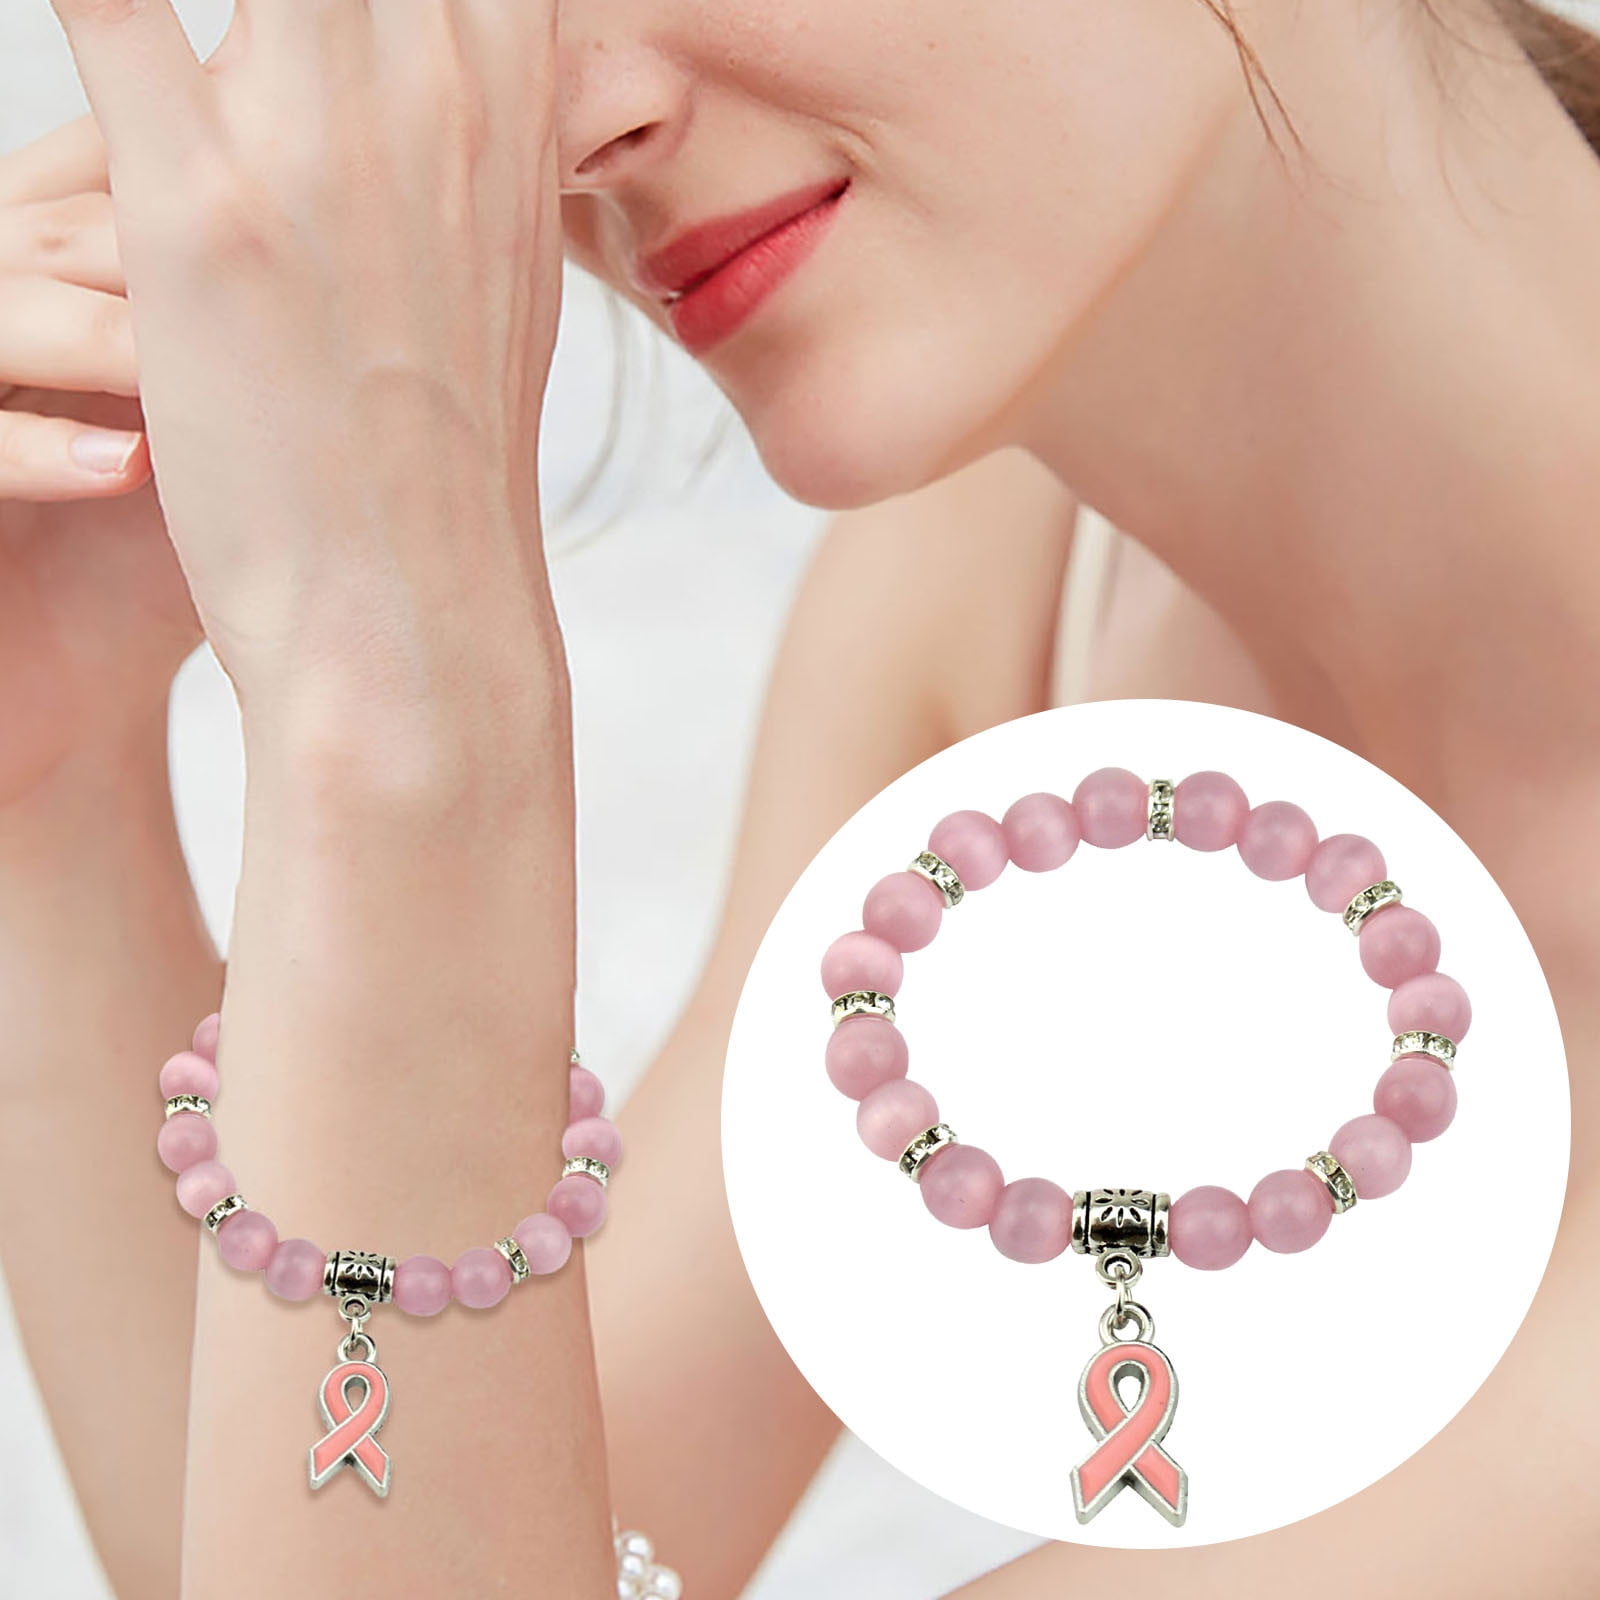 Amazon.com: Hidden Hollow Beads Breast Cancer Awareness Bracelet, Pink Out  Day, Great For Fundraising, Stretchy fits most, 6mm : Arts, Crafts & Sewing